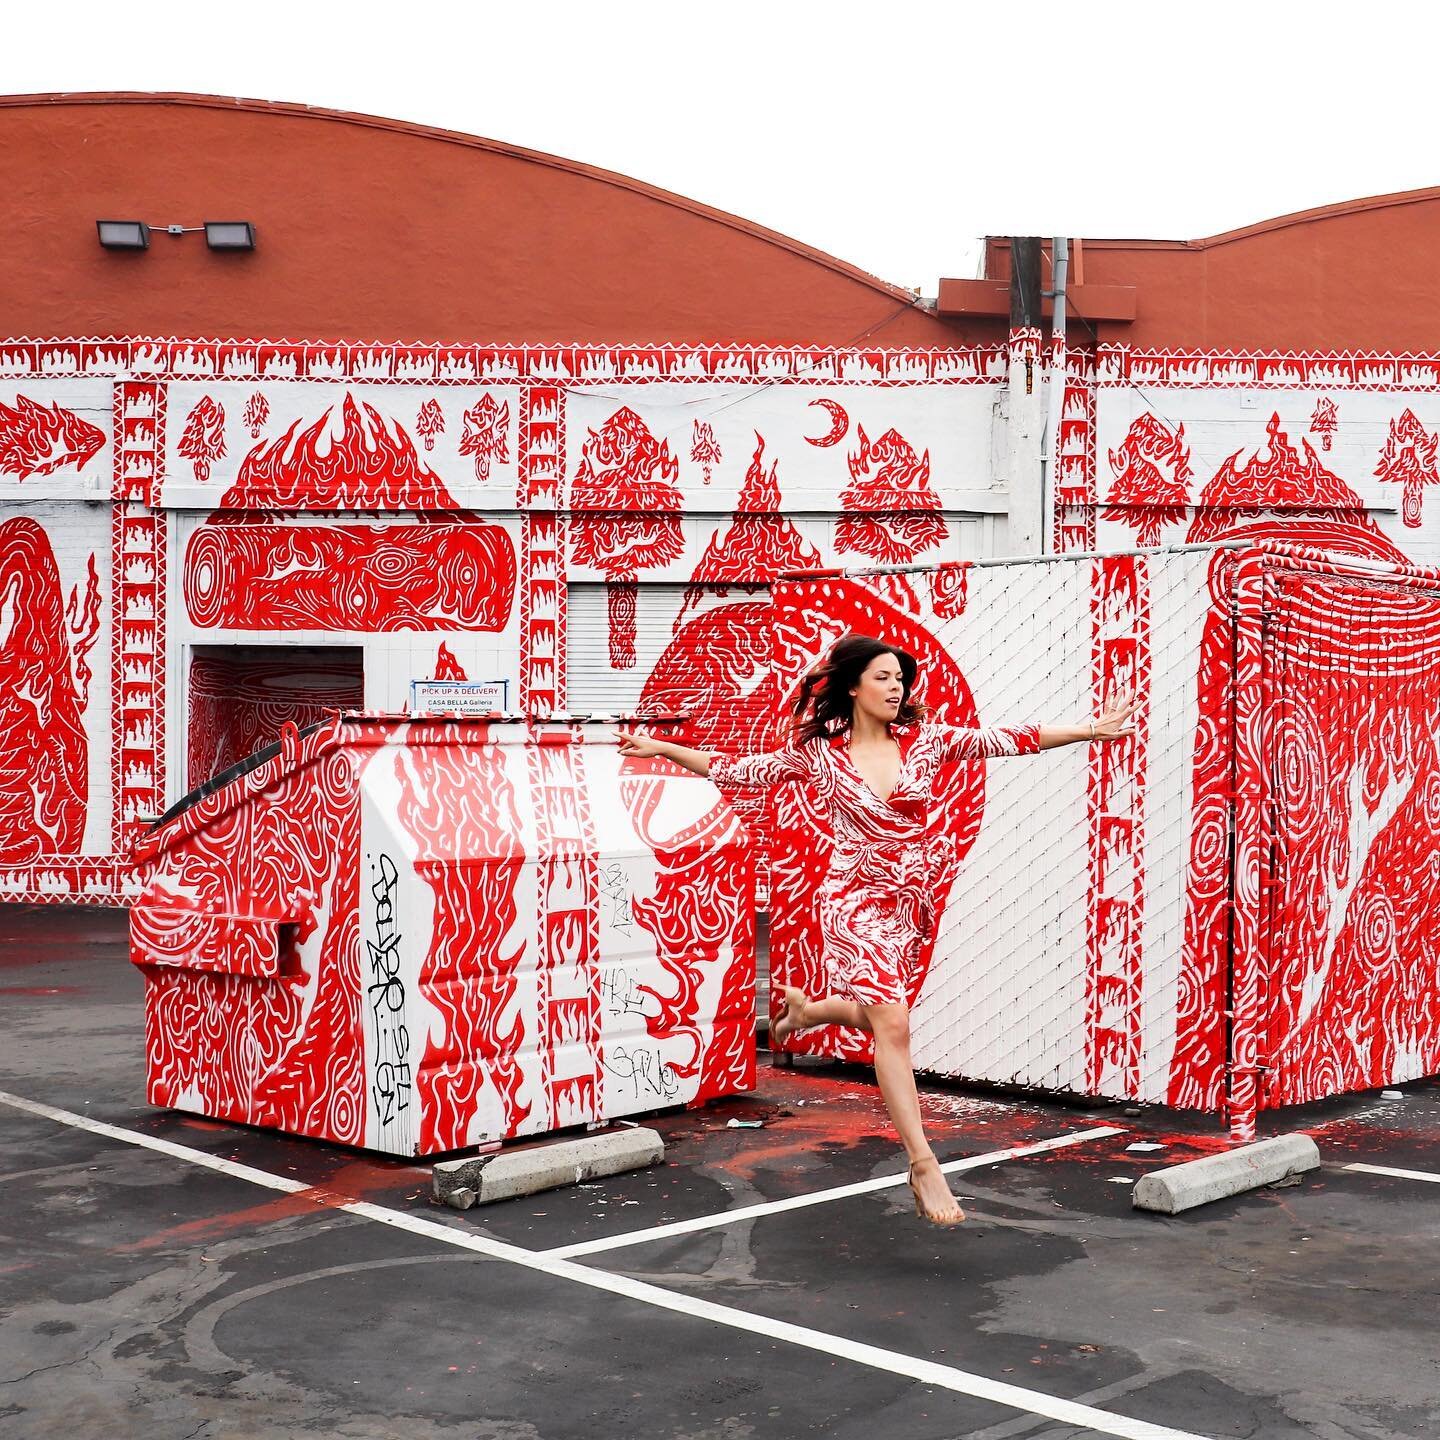 🔥💃🏻🔥 Happy New Year, everyone! I think we are all relieved to be leaving the dumpster fire that was 2020 behind! 😅👋🏻

I&rsquo;m #dressedtomatch @spencerkeetoncunningham&rsquo;s mural in Sacramento wearing a classic @dvf vintage wrap dress! 💃?